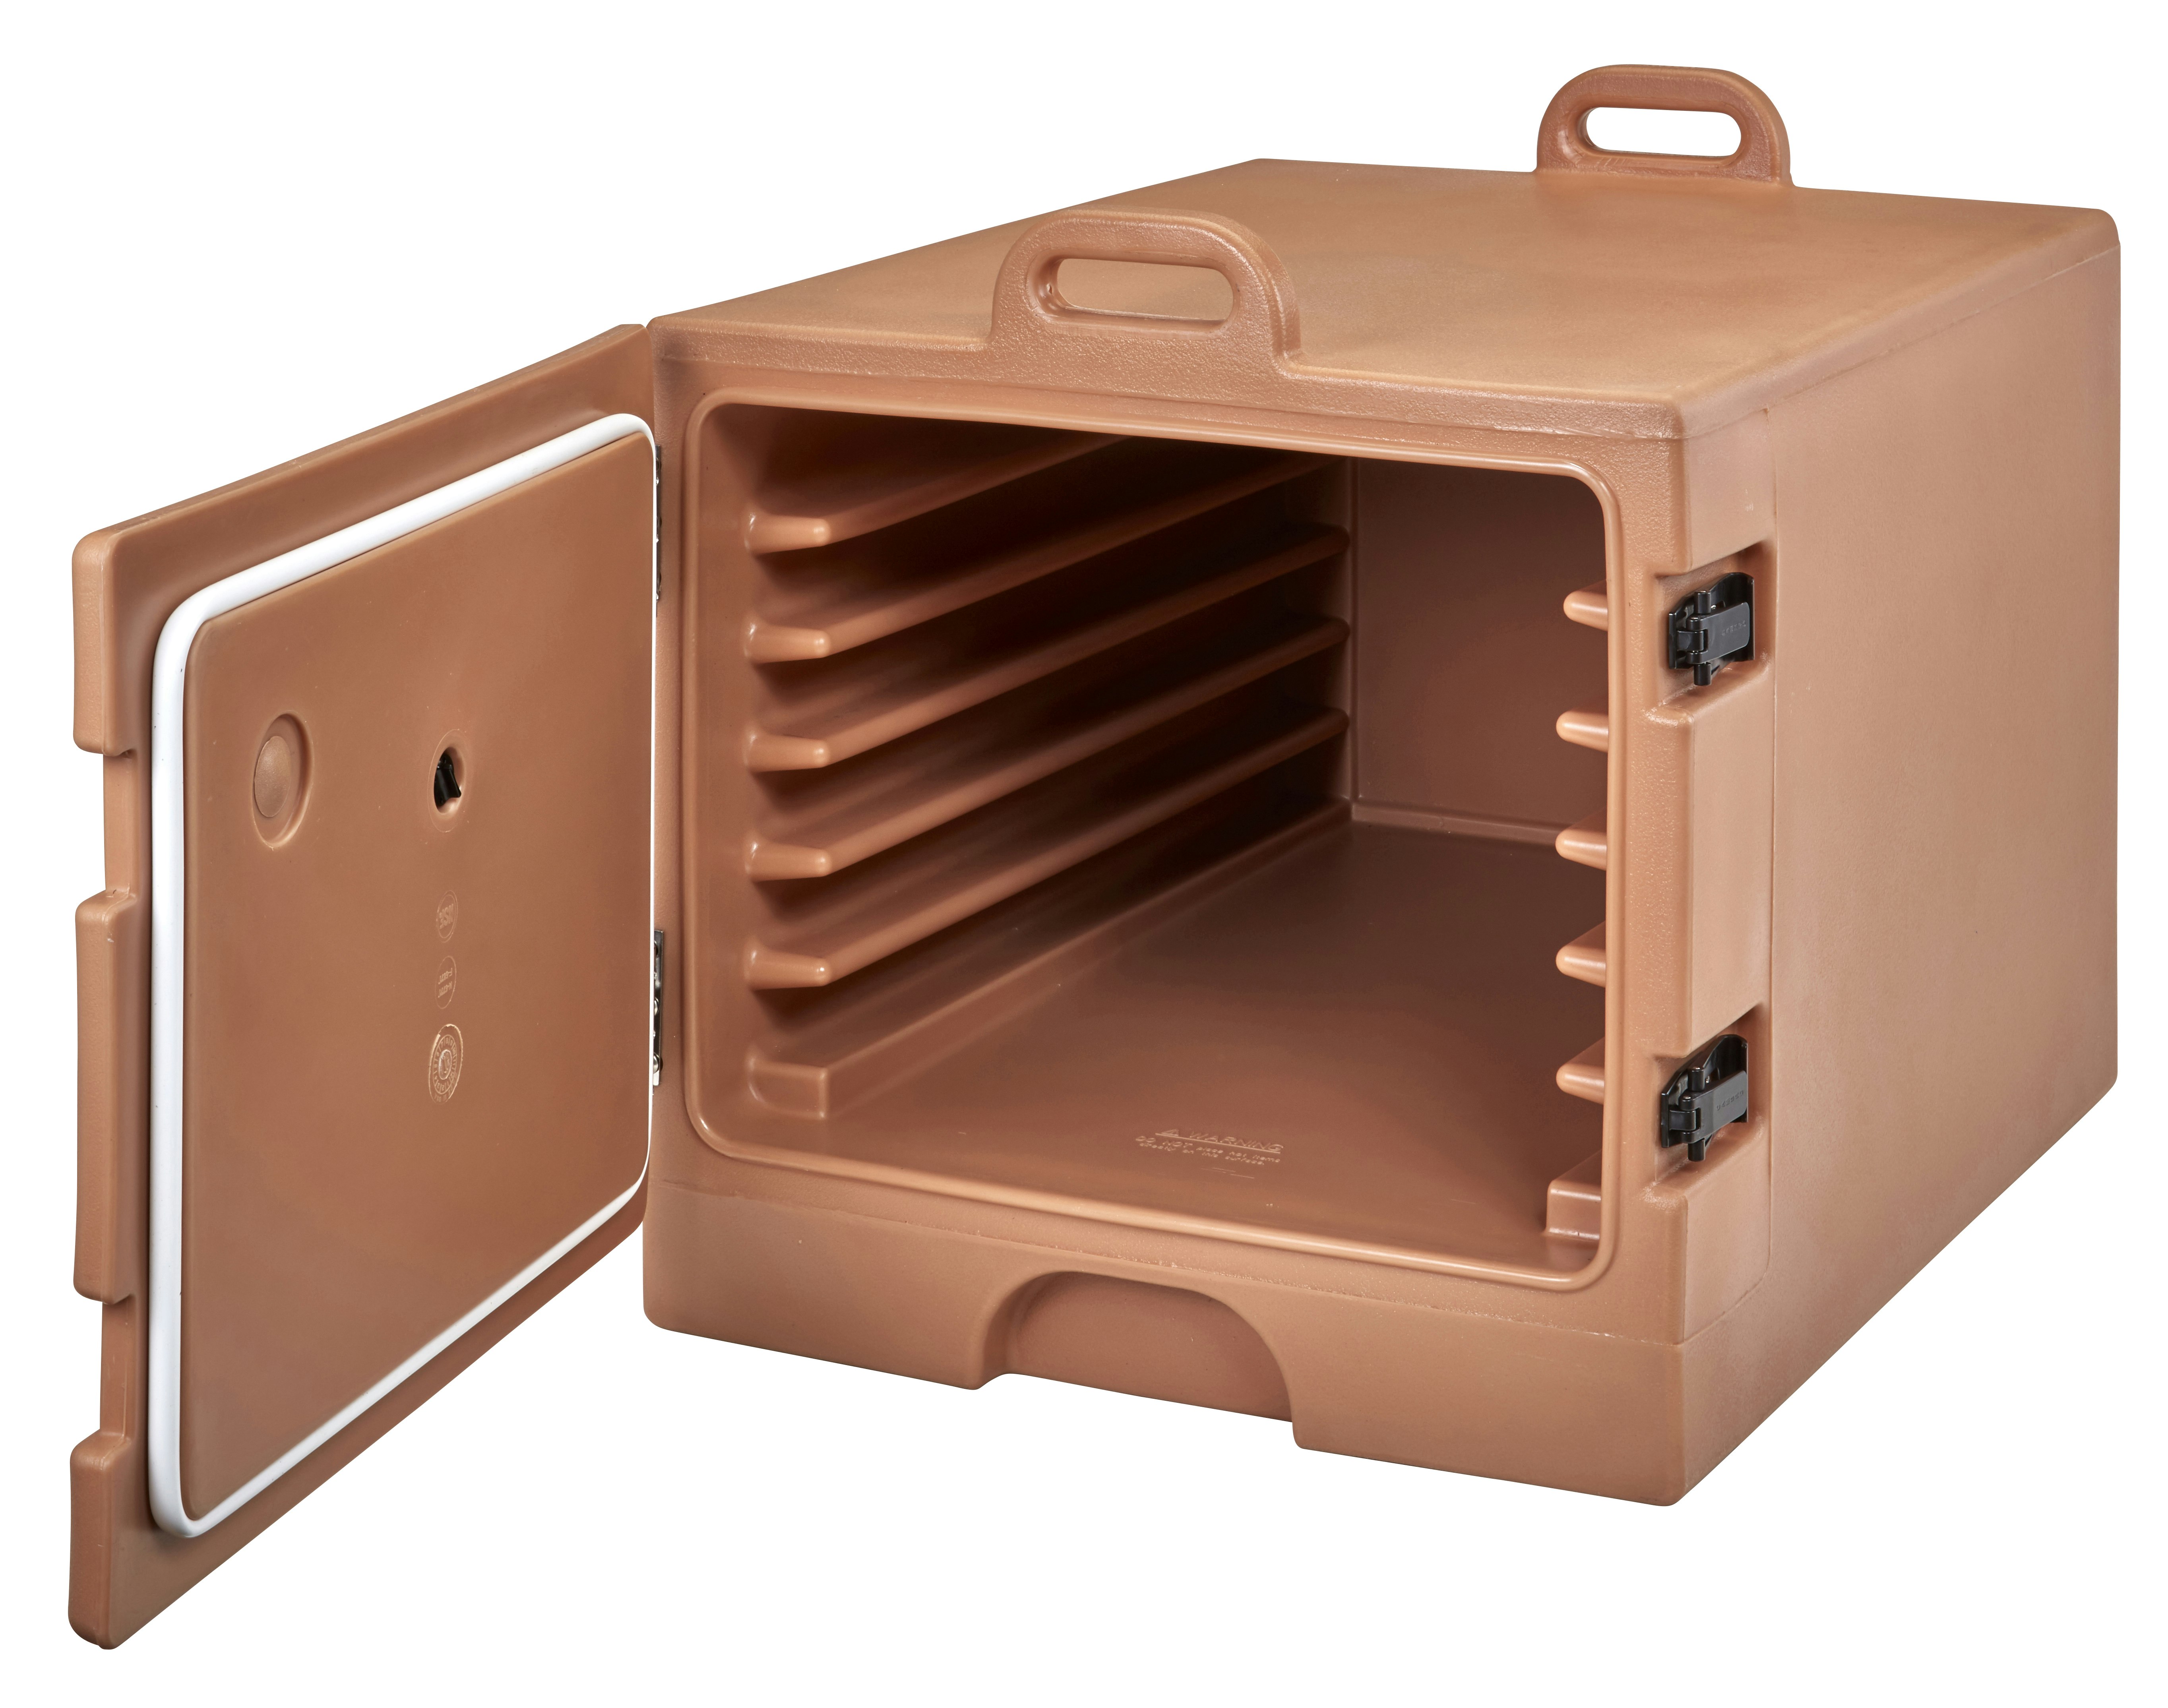 1/3 & Full Size Pans 2-1/2 to 8 deep Holds 1/2 Front Loading Beige Case of 1 Cambro UPC400157 Ultra Pan Carrier 